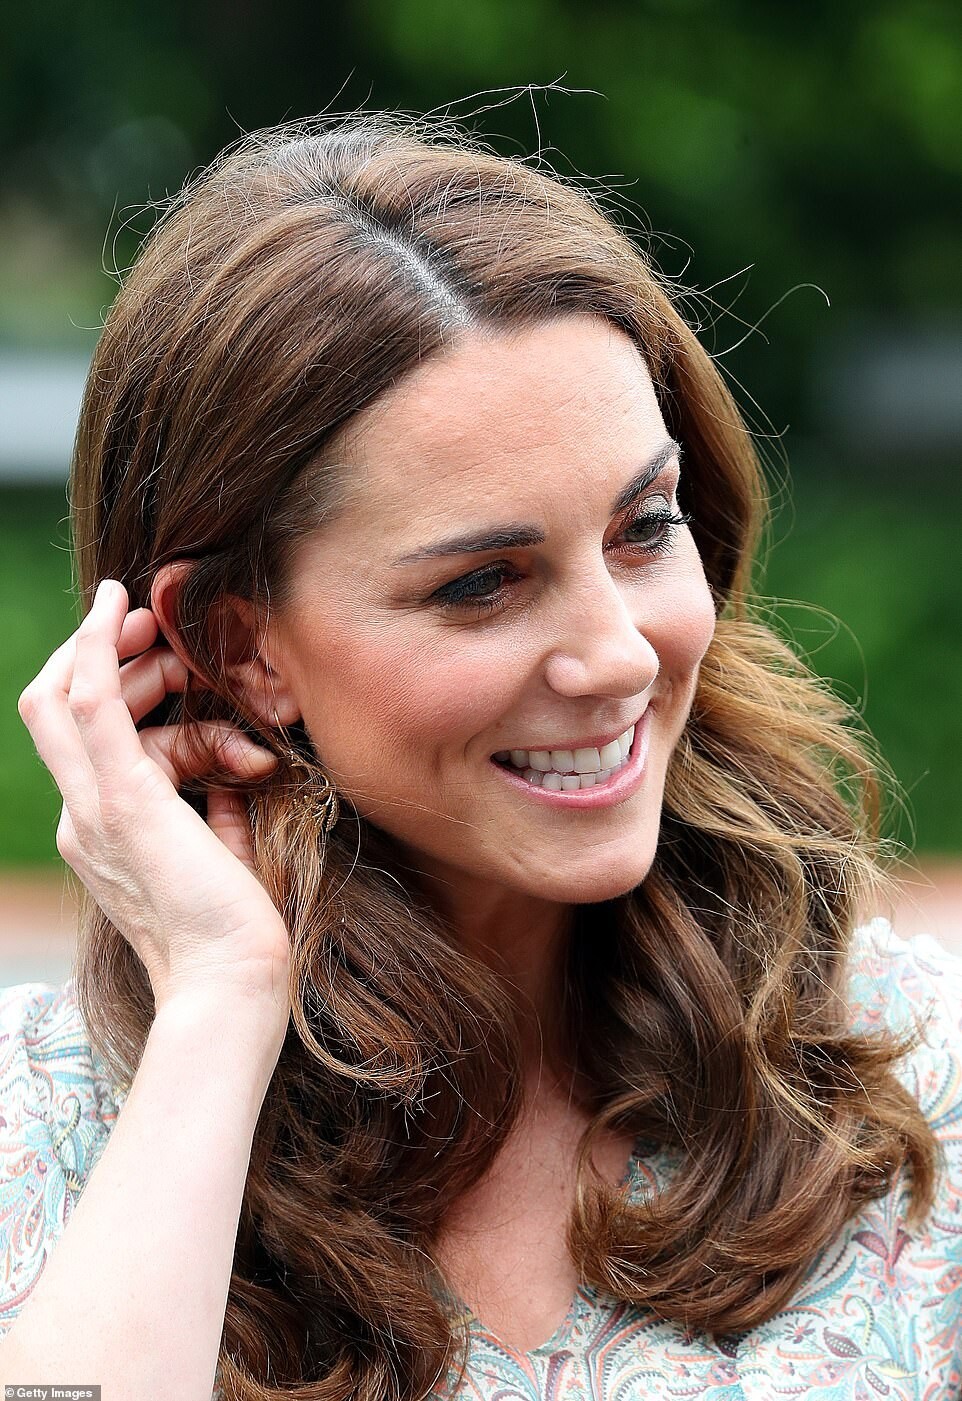 Kate Middleton arriving for Royal Photographic Society workshop London 2 - Kate Middleton Sexy Patron of Royal Photographic Society (25 Photos)